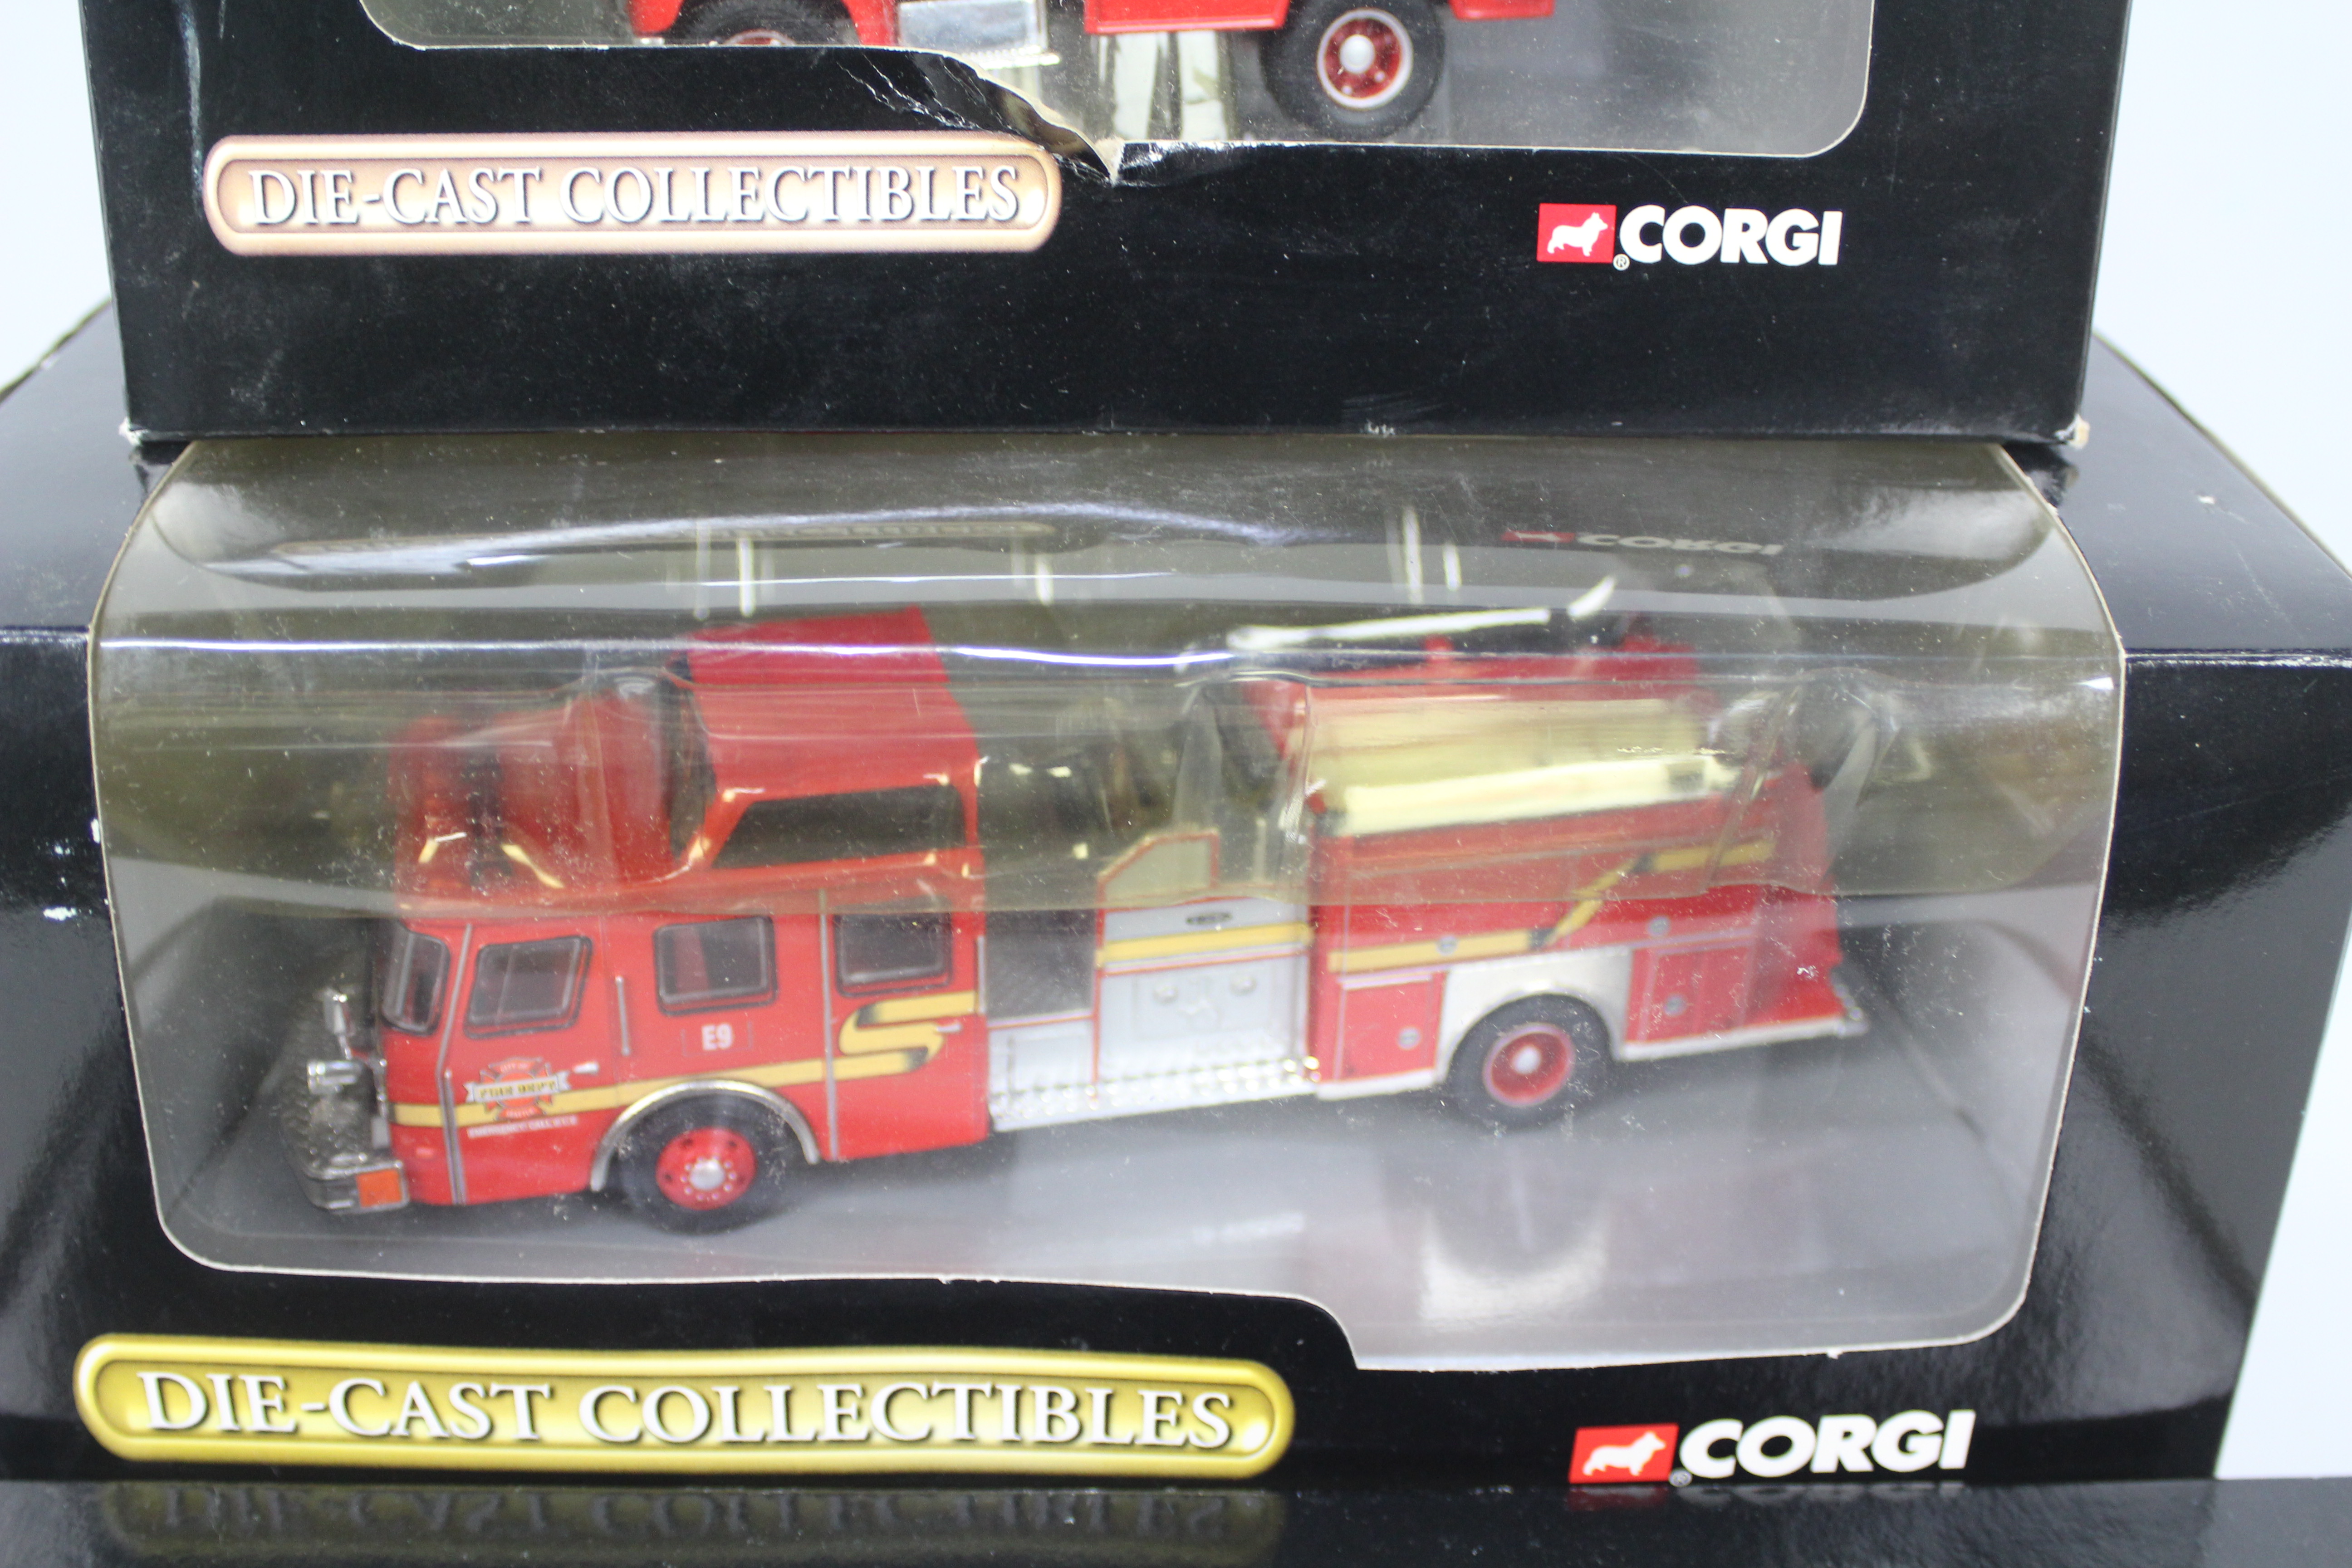 Corgi - Three boxed diecast vehicles from Corgi's 'Diecast Collectibles' North American Fire - Image 3 of 5